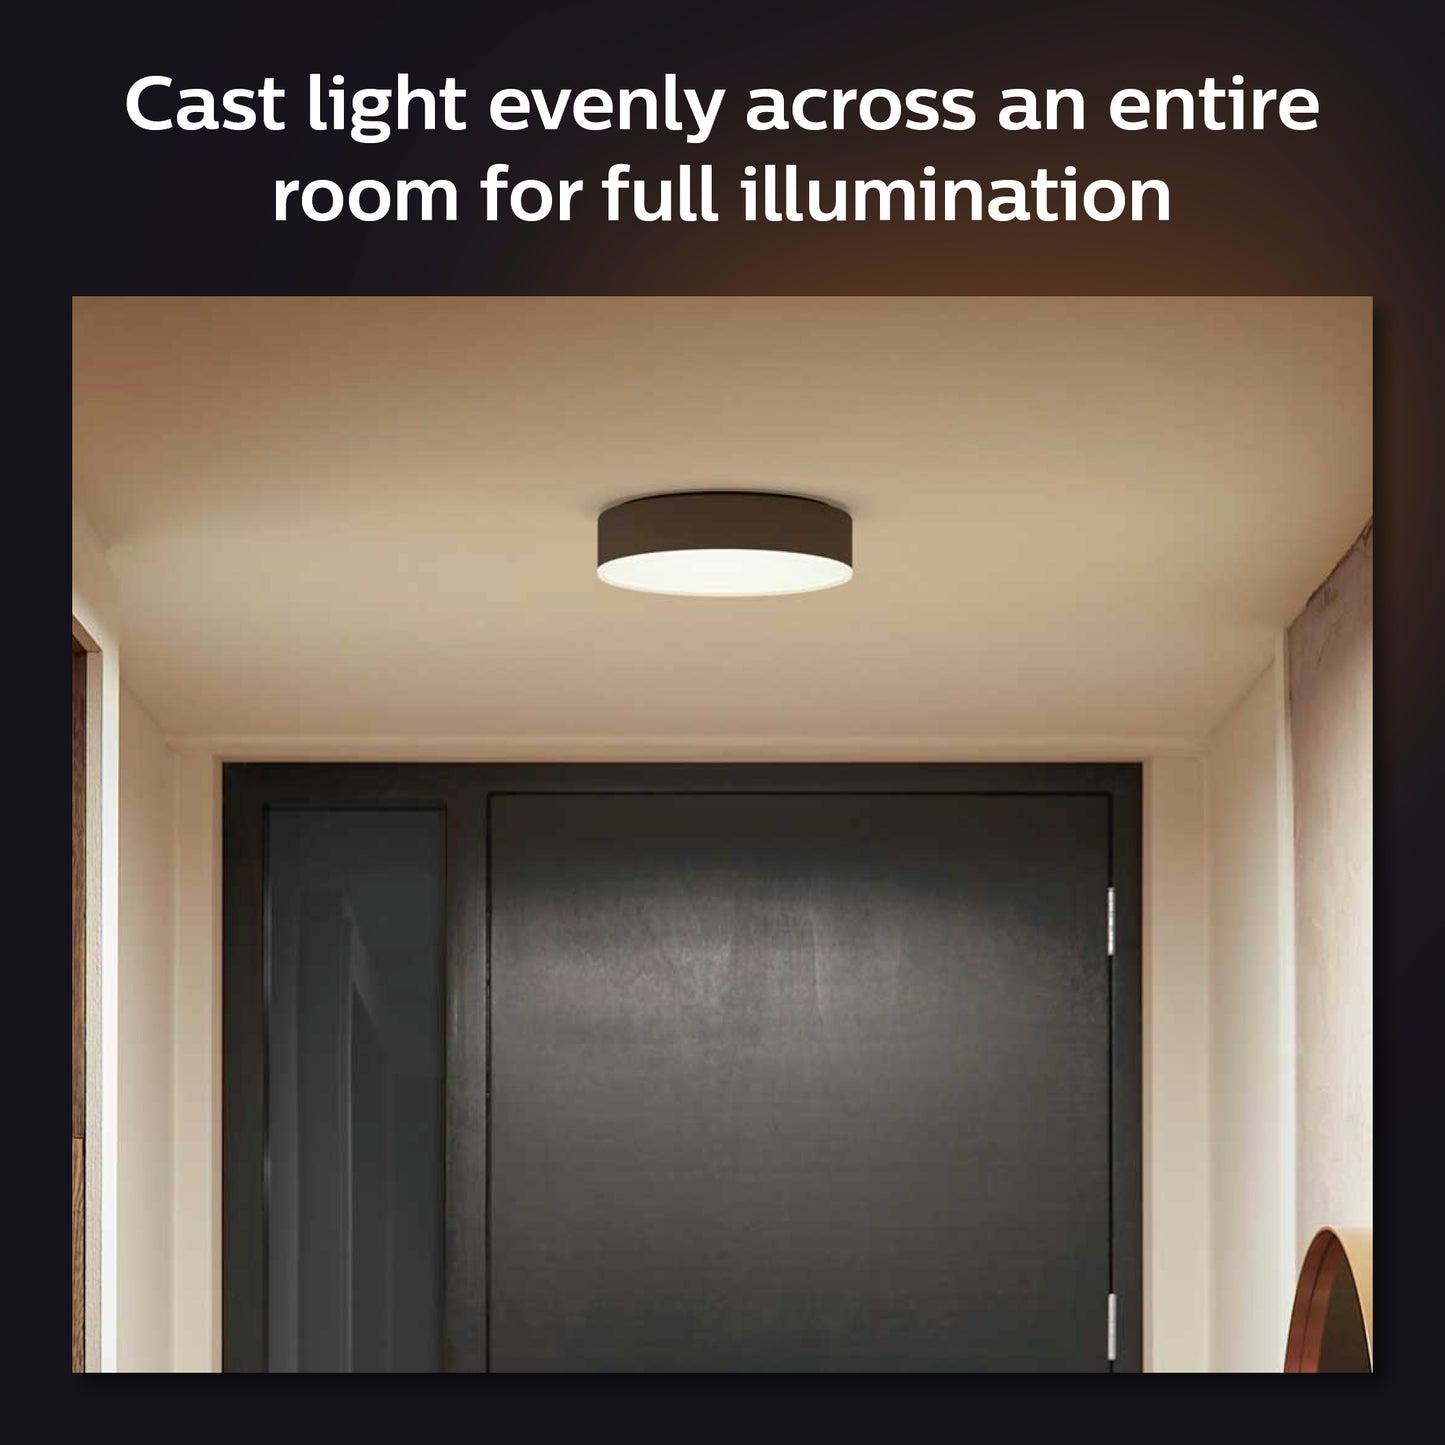 Philips Hue - Enrave S taklampa inkl